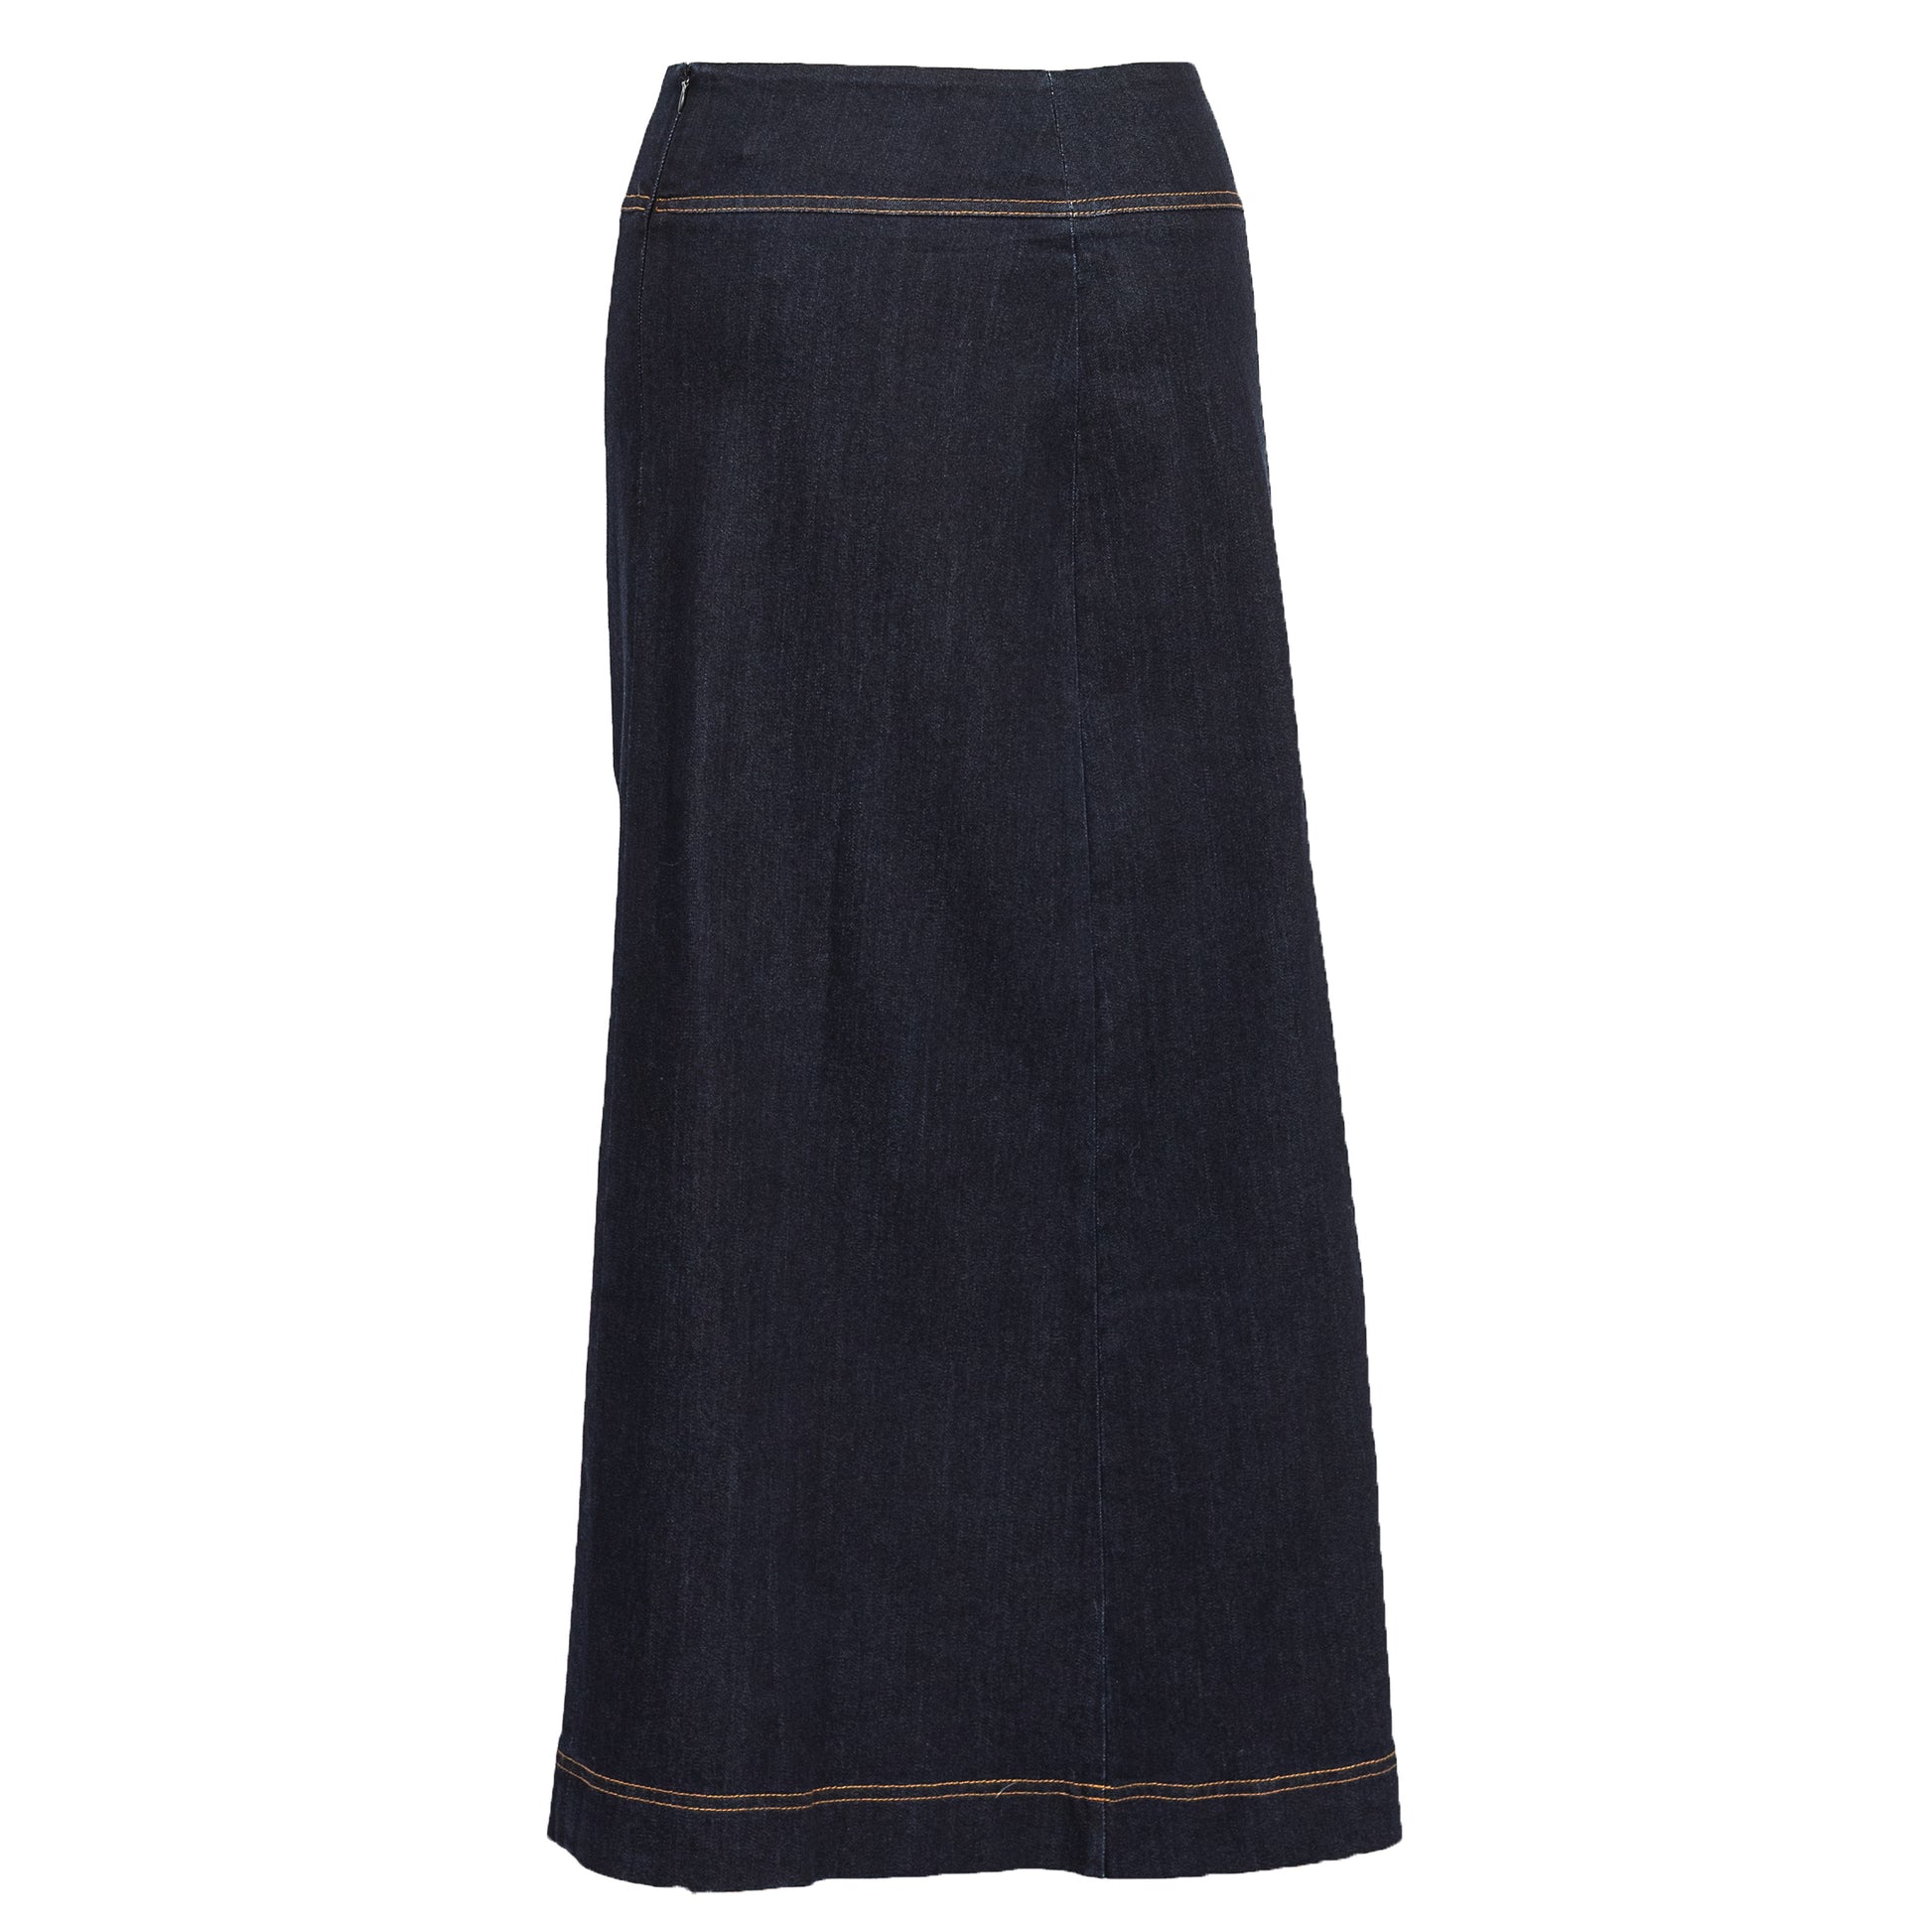 Back of the NewCreationApparel's Classic Long Denim A-Line Skirt